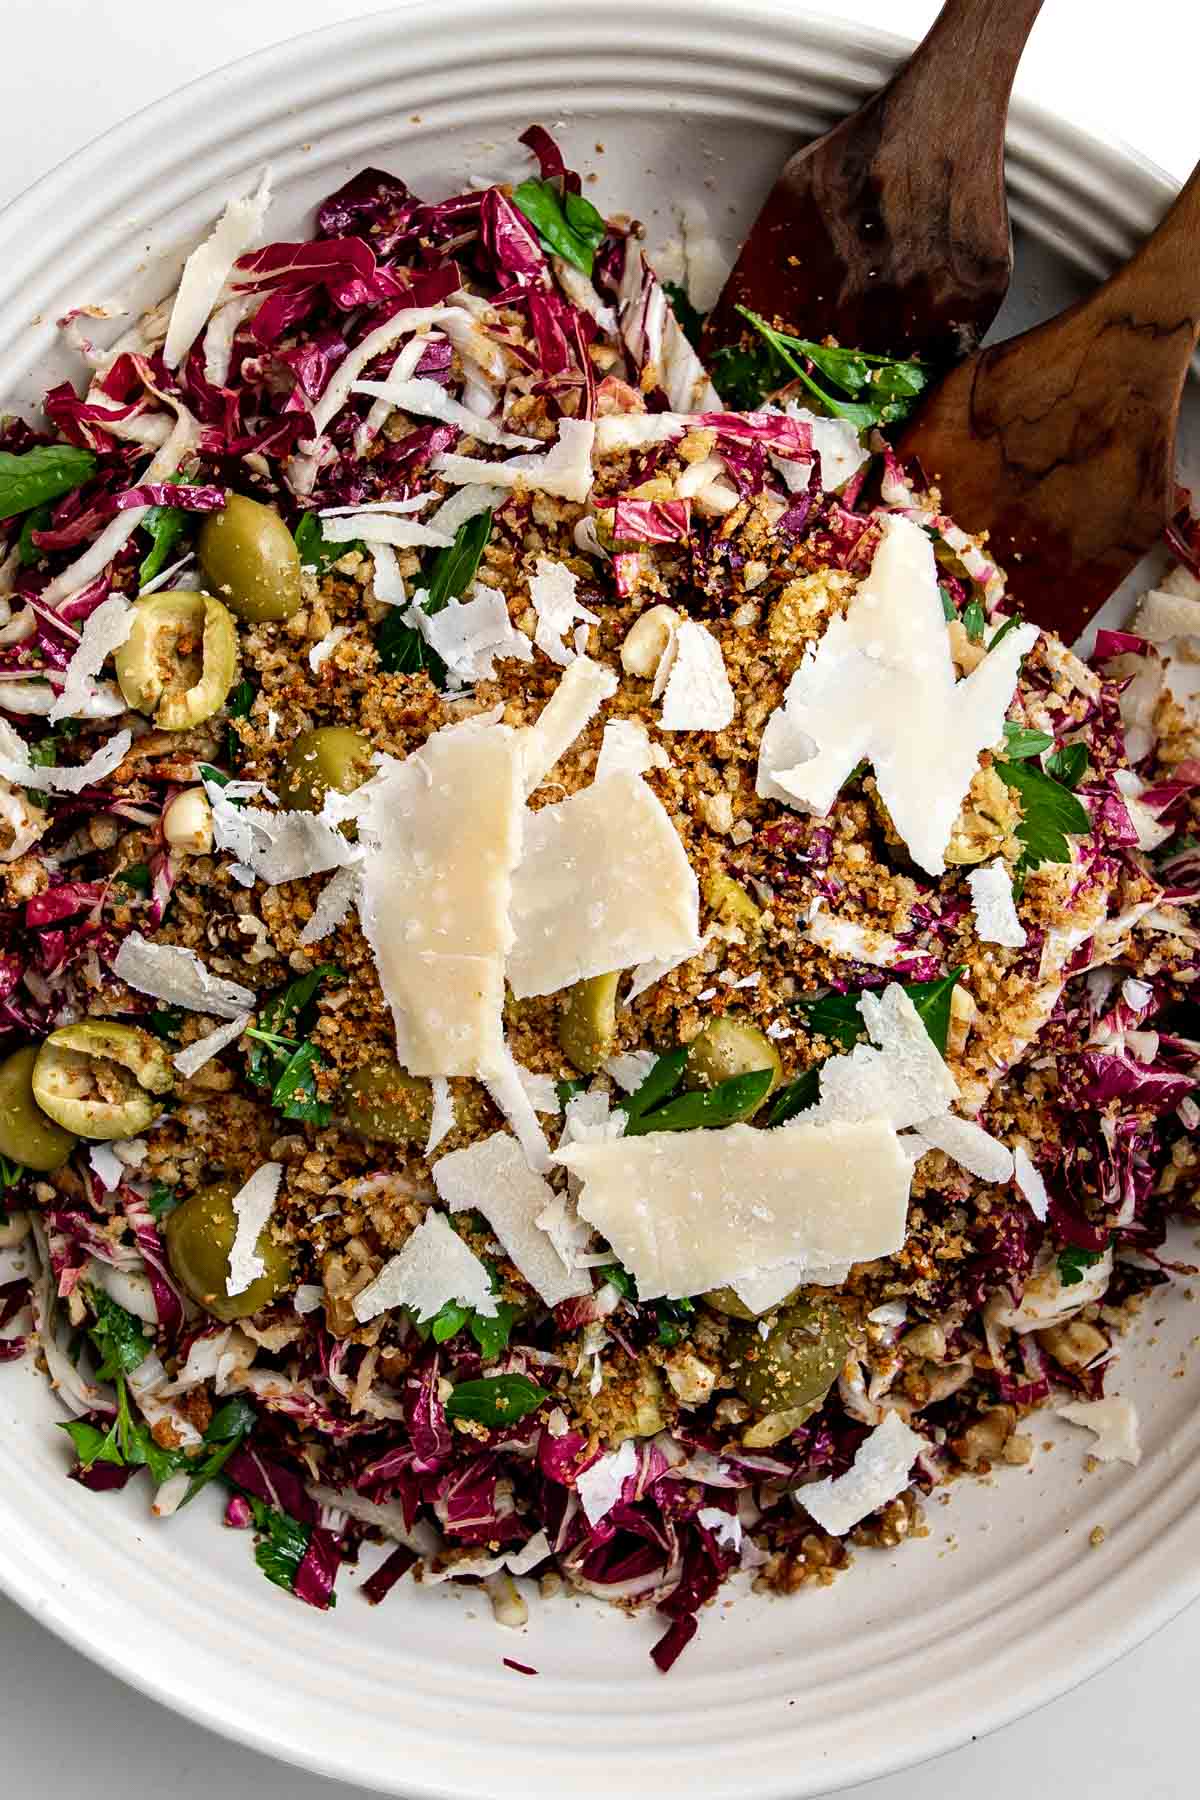 Shredded radicchio topped with pitted olives, bread crumbs, parmesan and parsley in a large serving bowl.